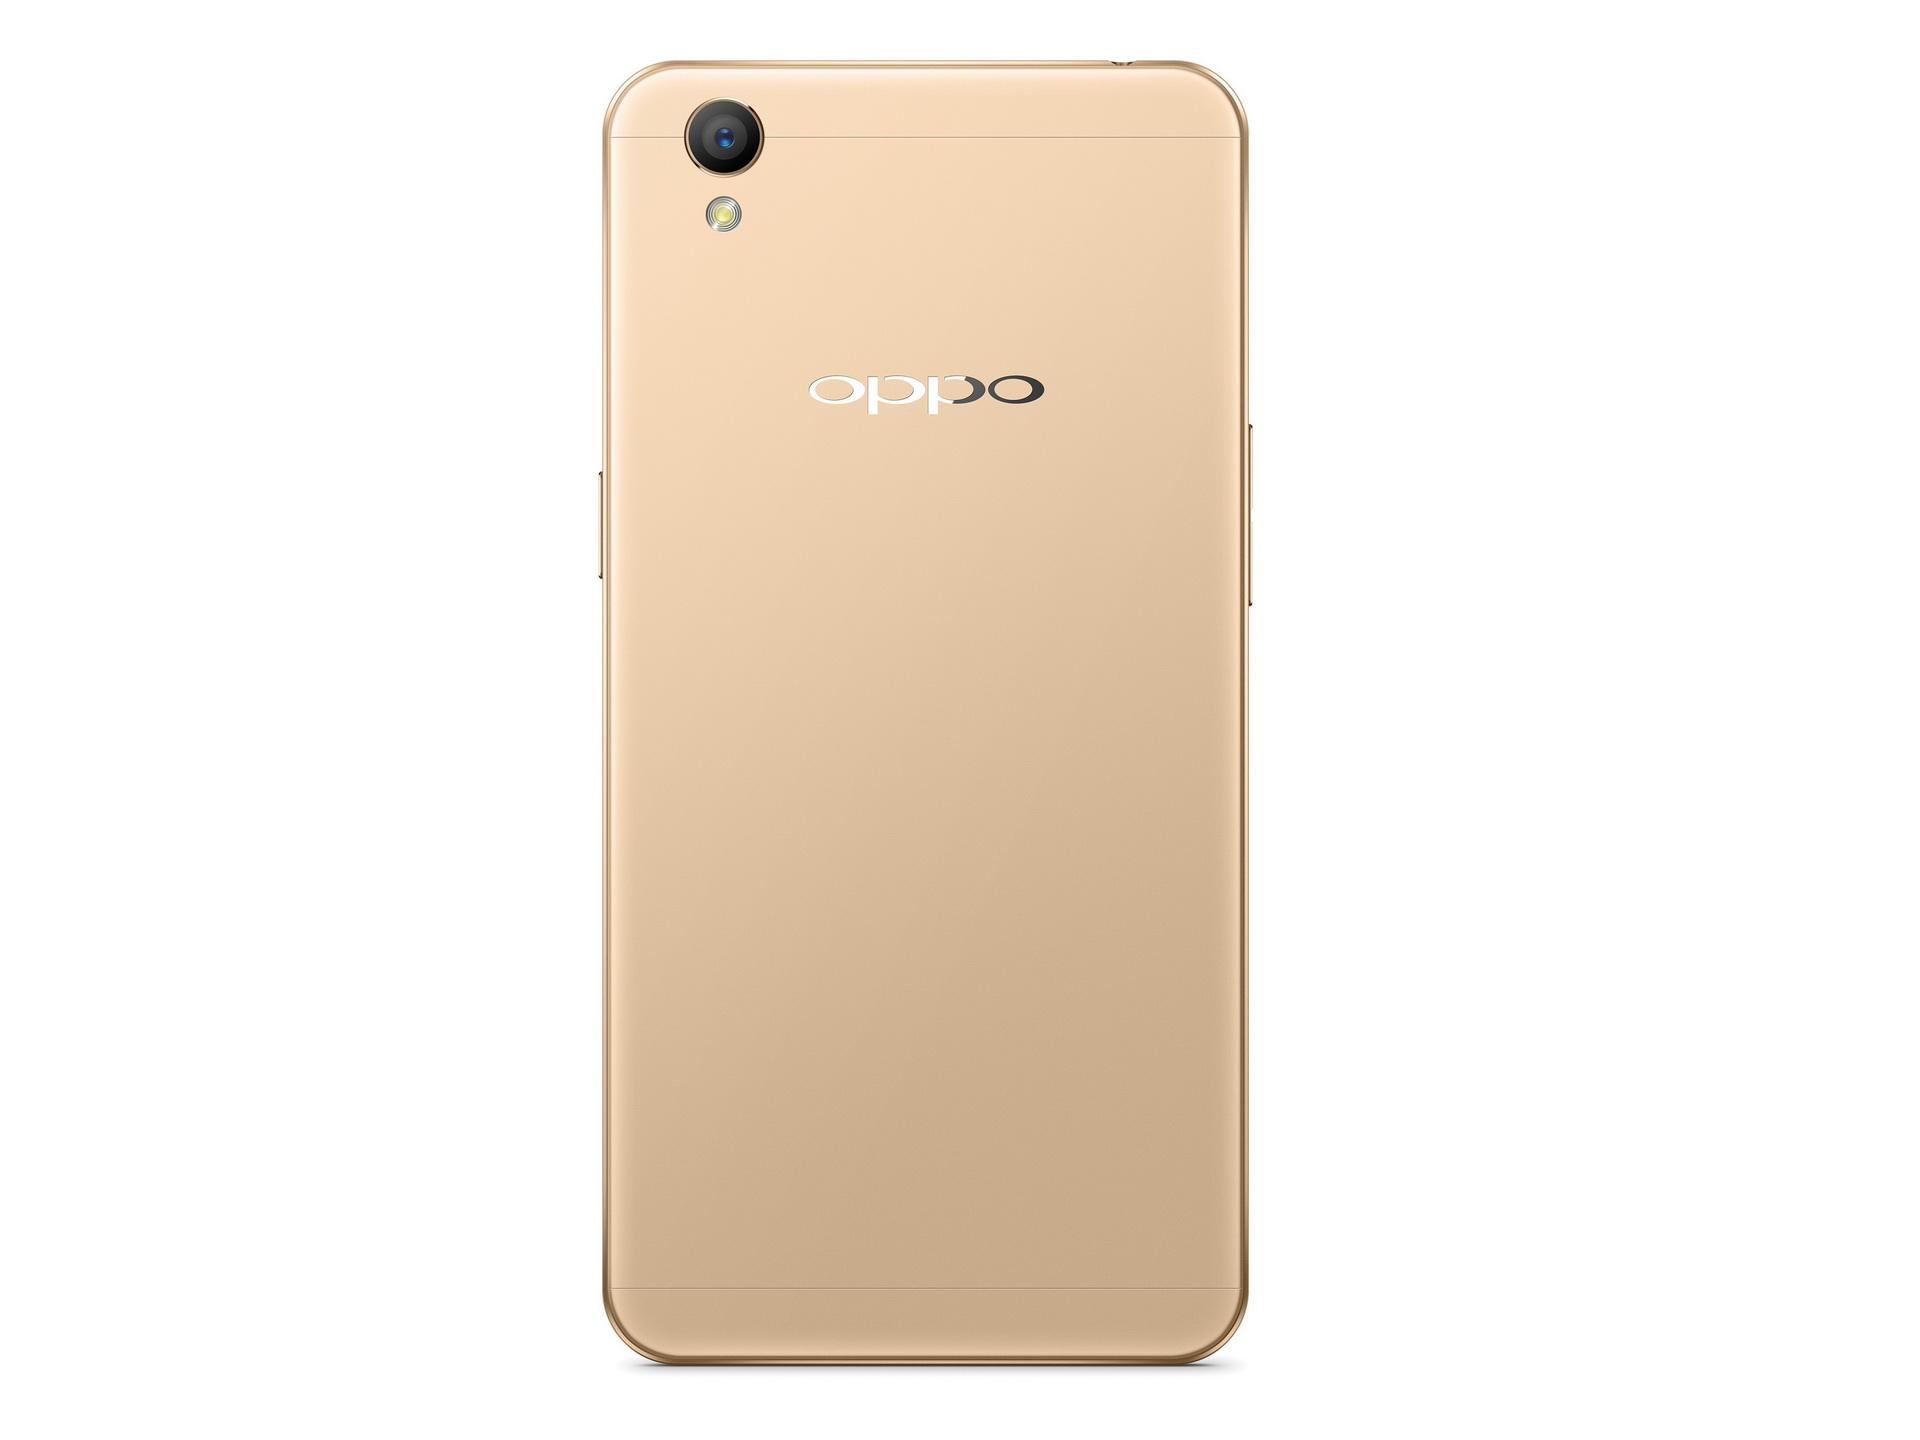 The latest OPPOA33m special offer is 640 yuan